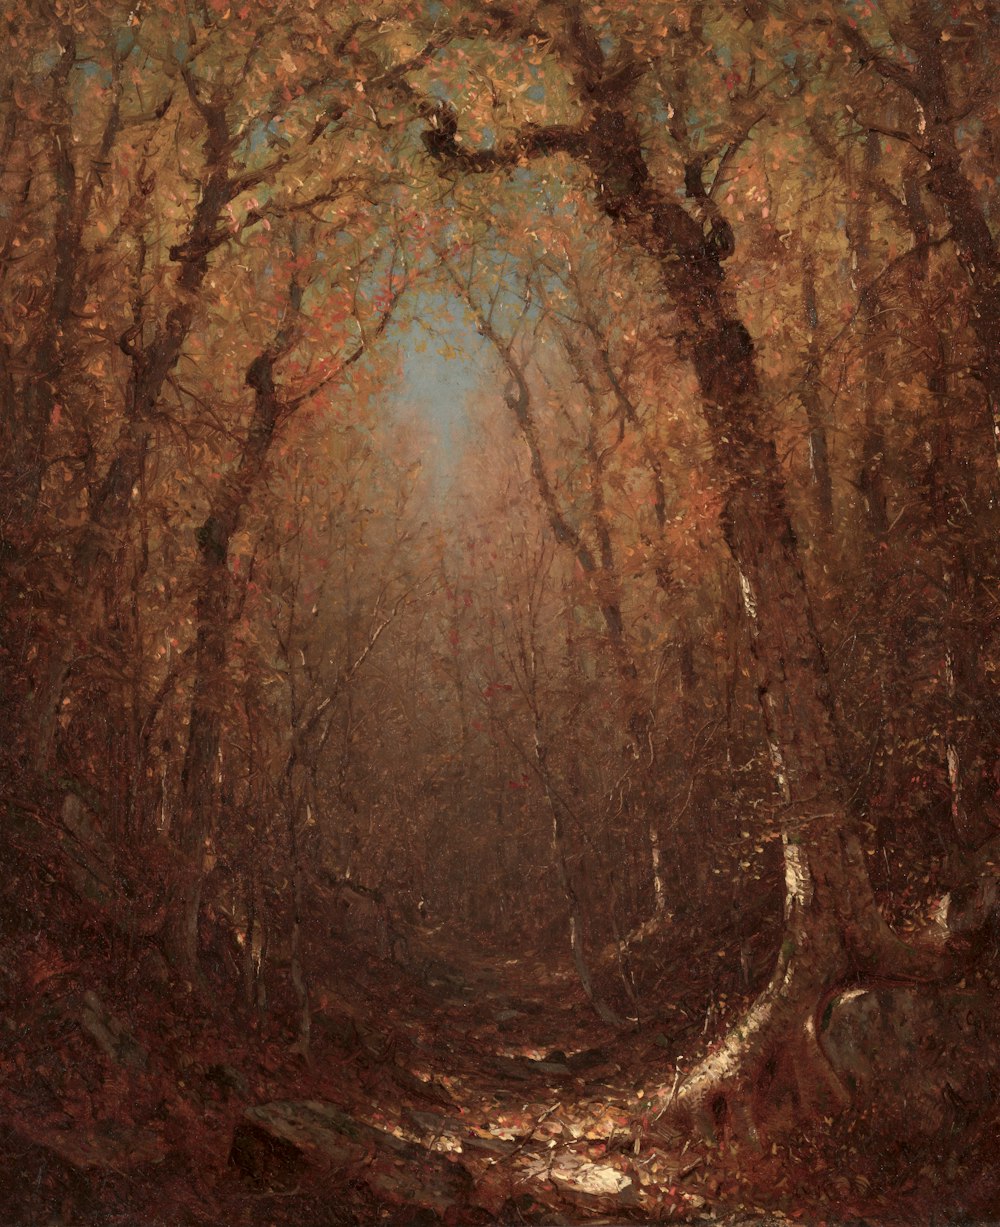 a painting of a path through a forest